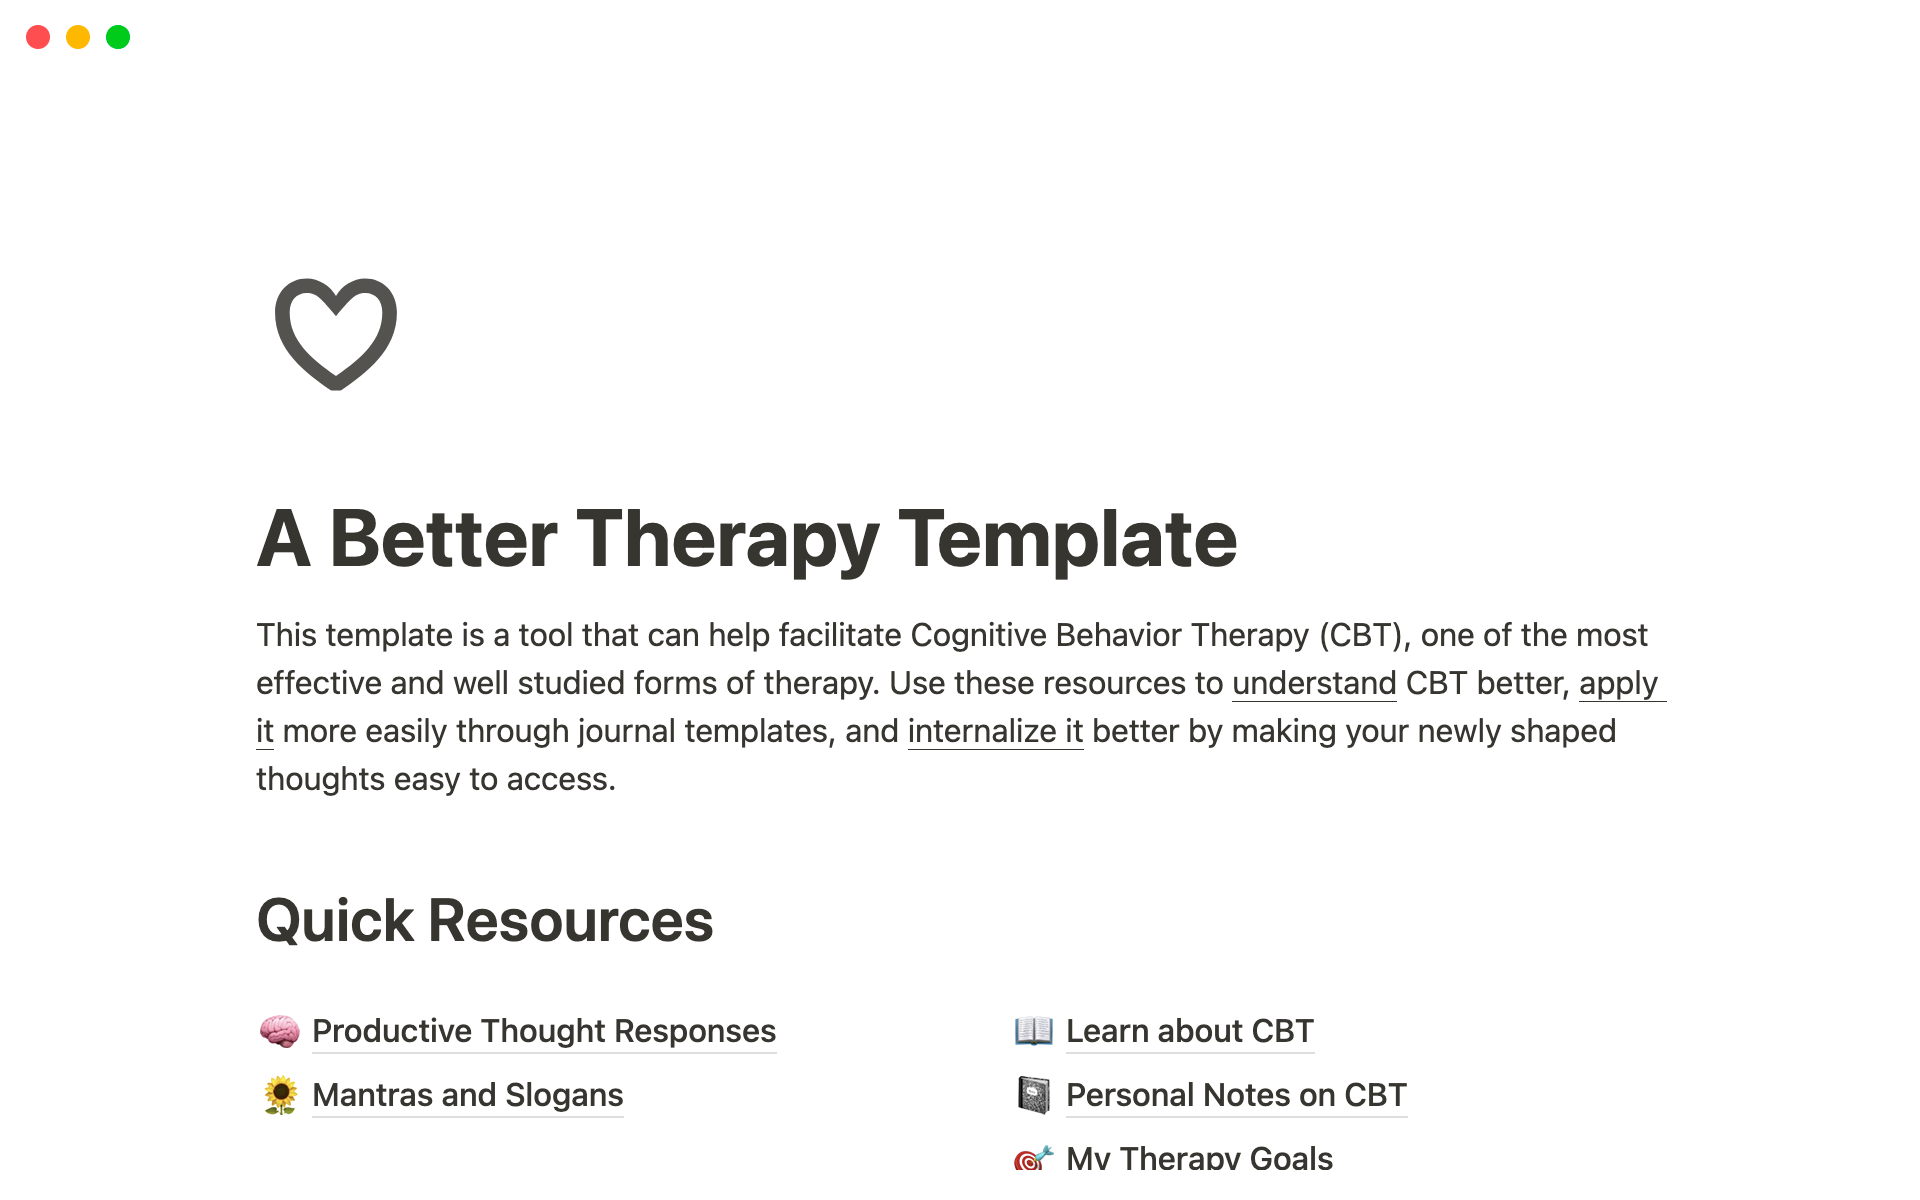 A simple but powerful template built for cognitive behavioral therapy